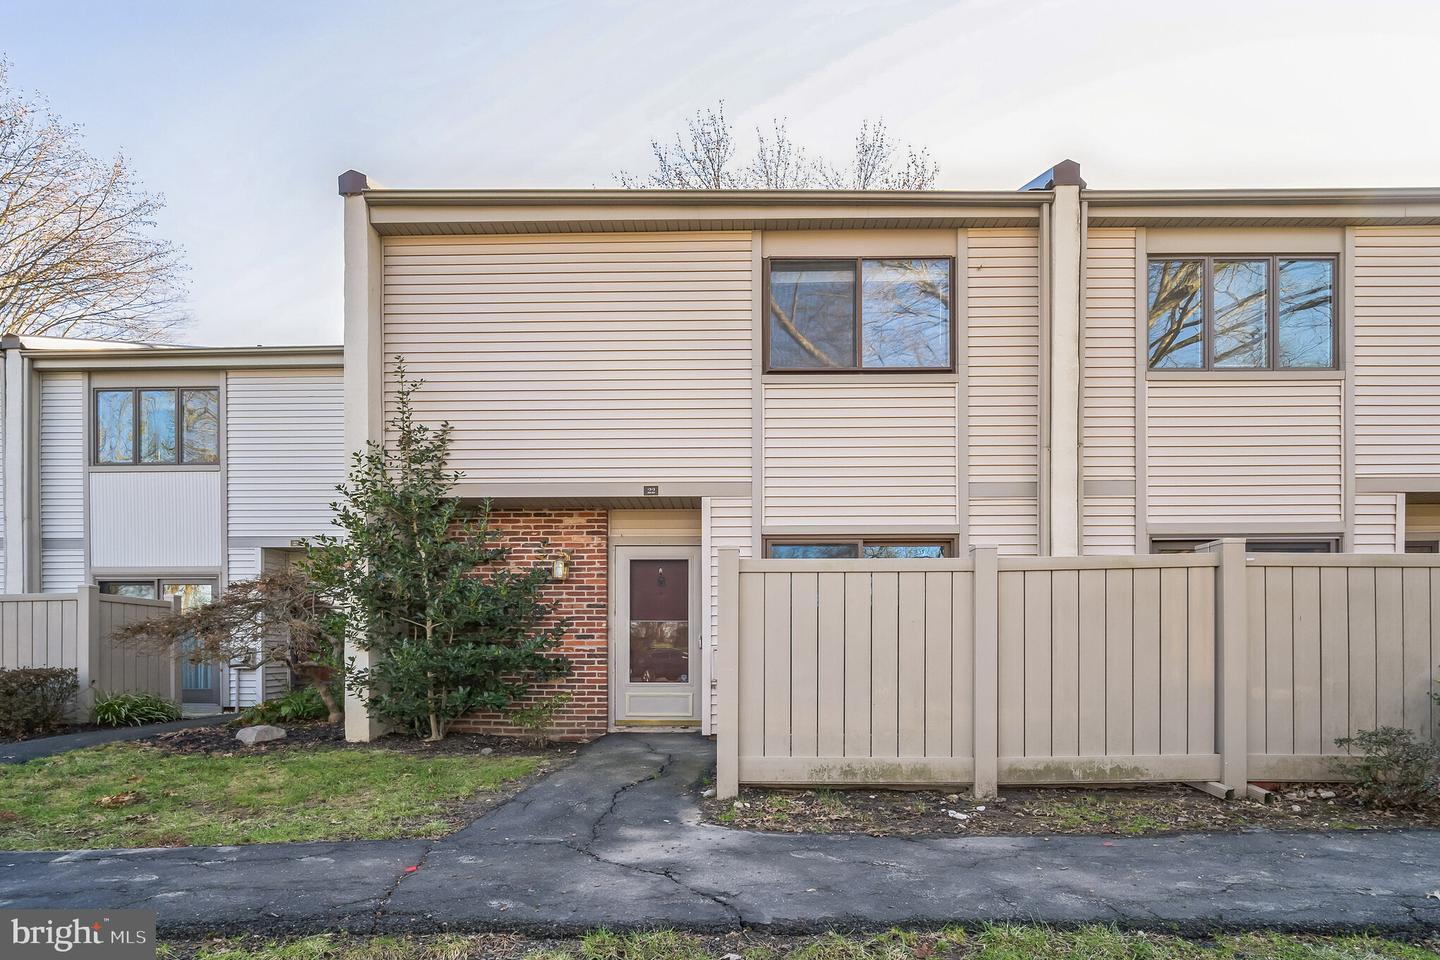 View Willow Grove, PA 19090 townhome